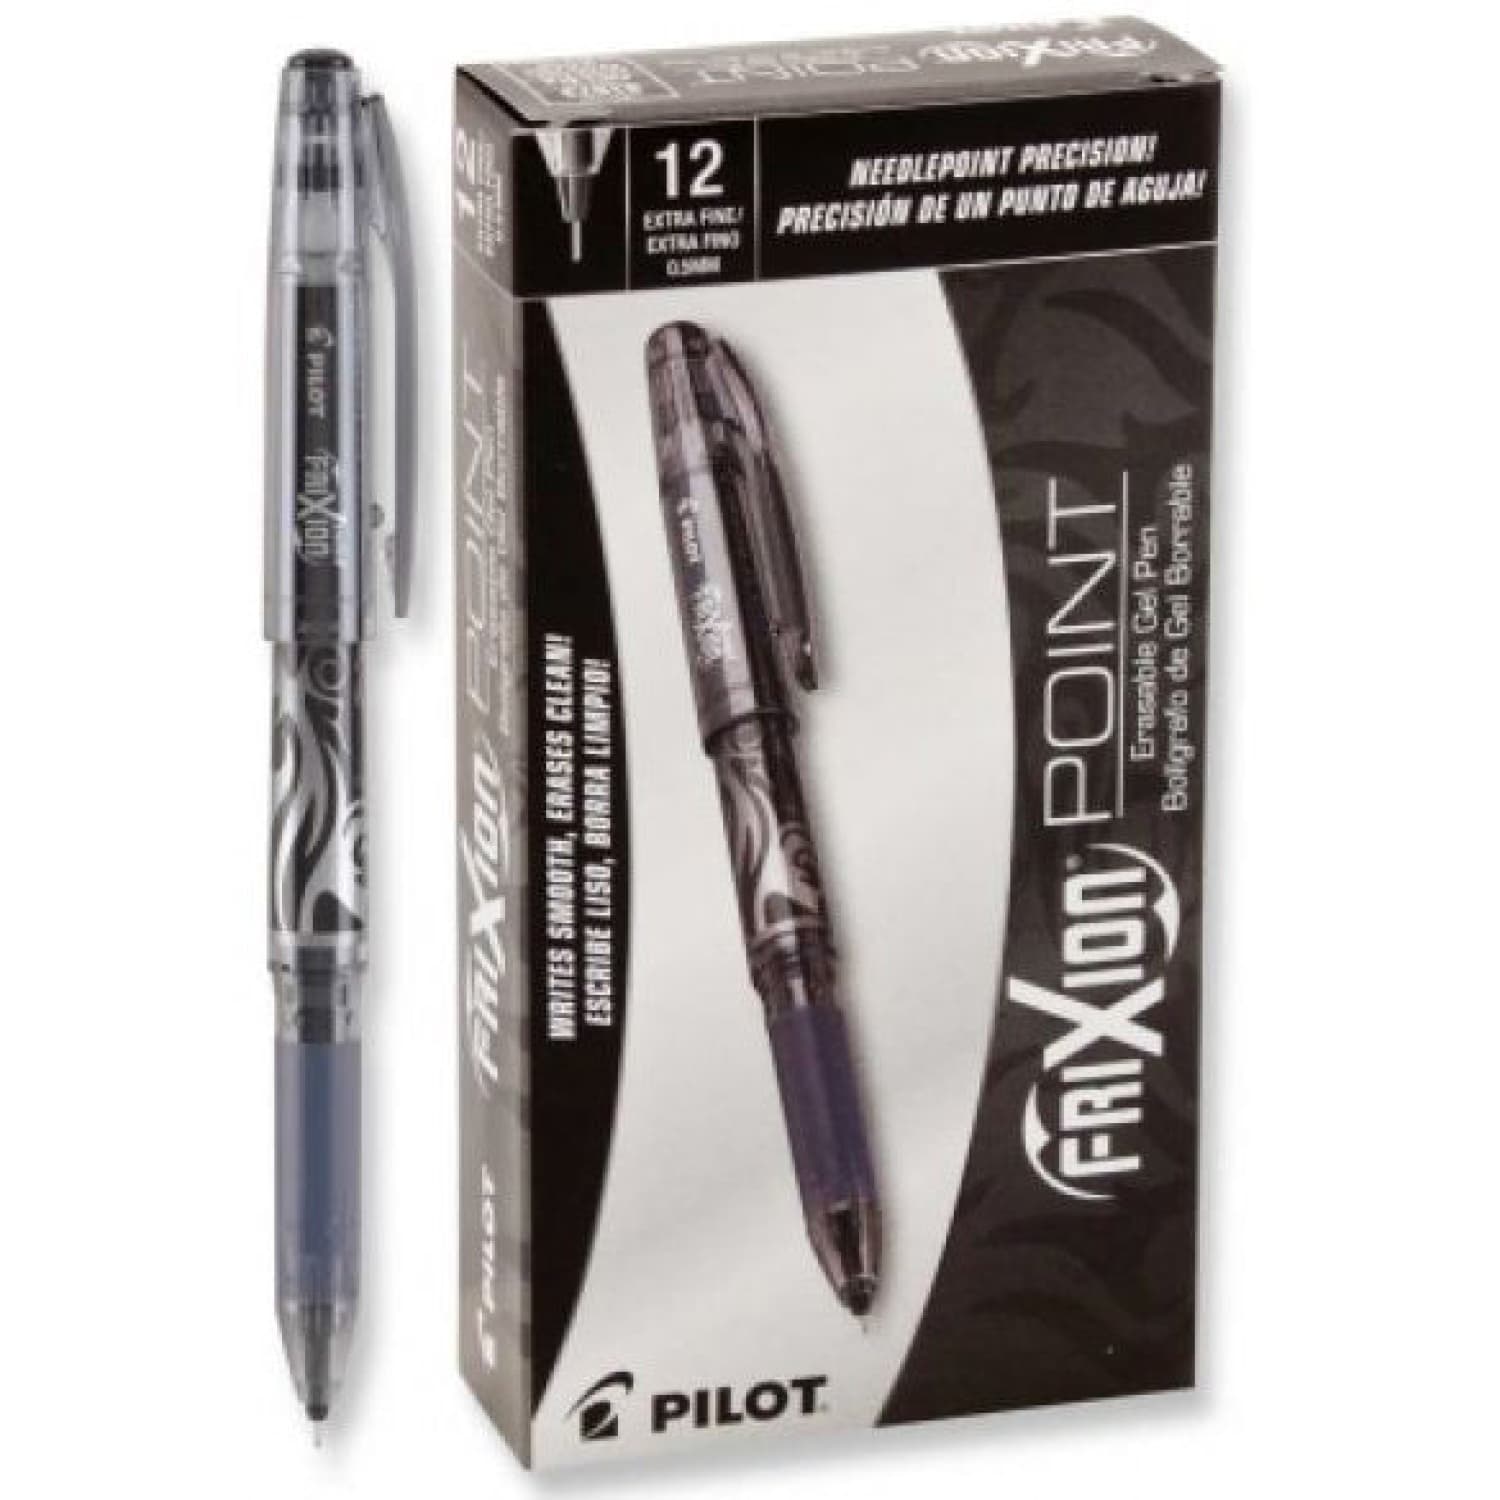 Pilot FriXion Point Erasable Rollerball Gel Pen in Black - Extra Fine Point  - Pack of 12